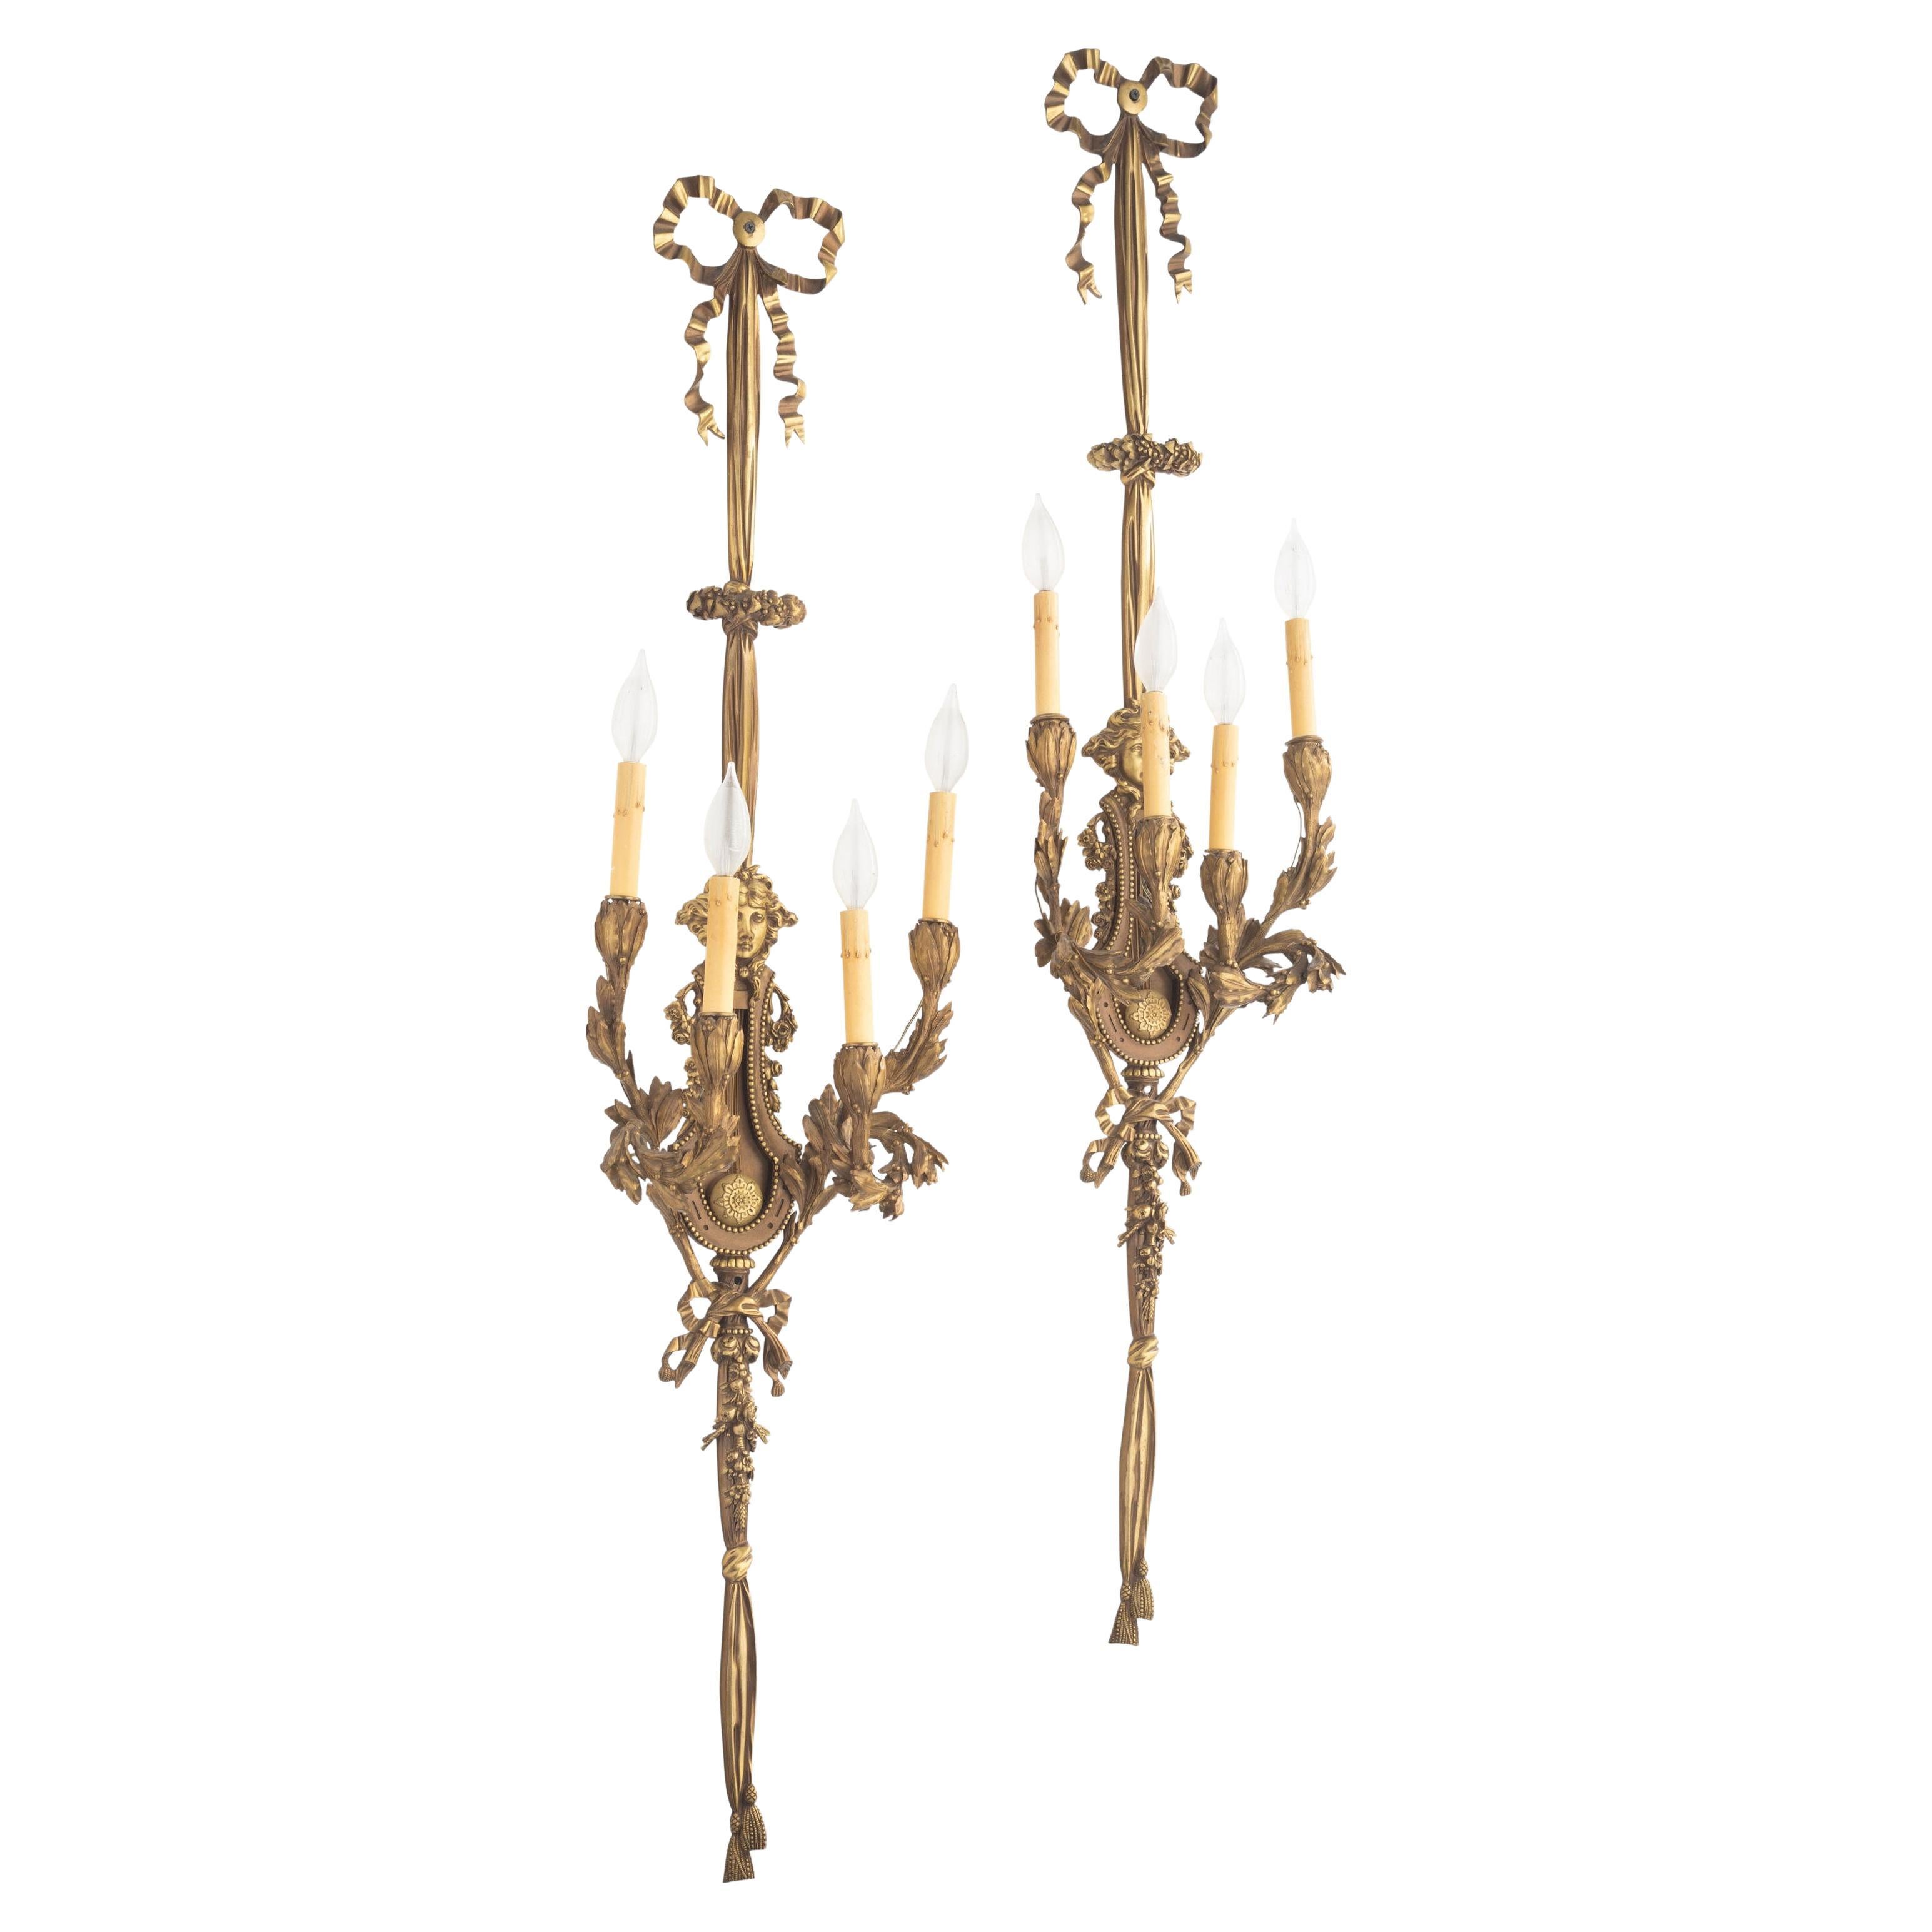 Pair Of French Ormolu Four Branch Wall Lights After Beurdeley Attrb Henry Dasson For Sale